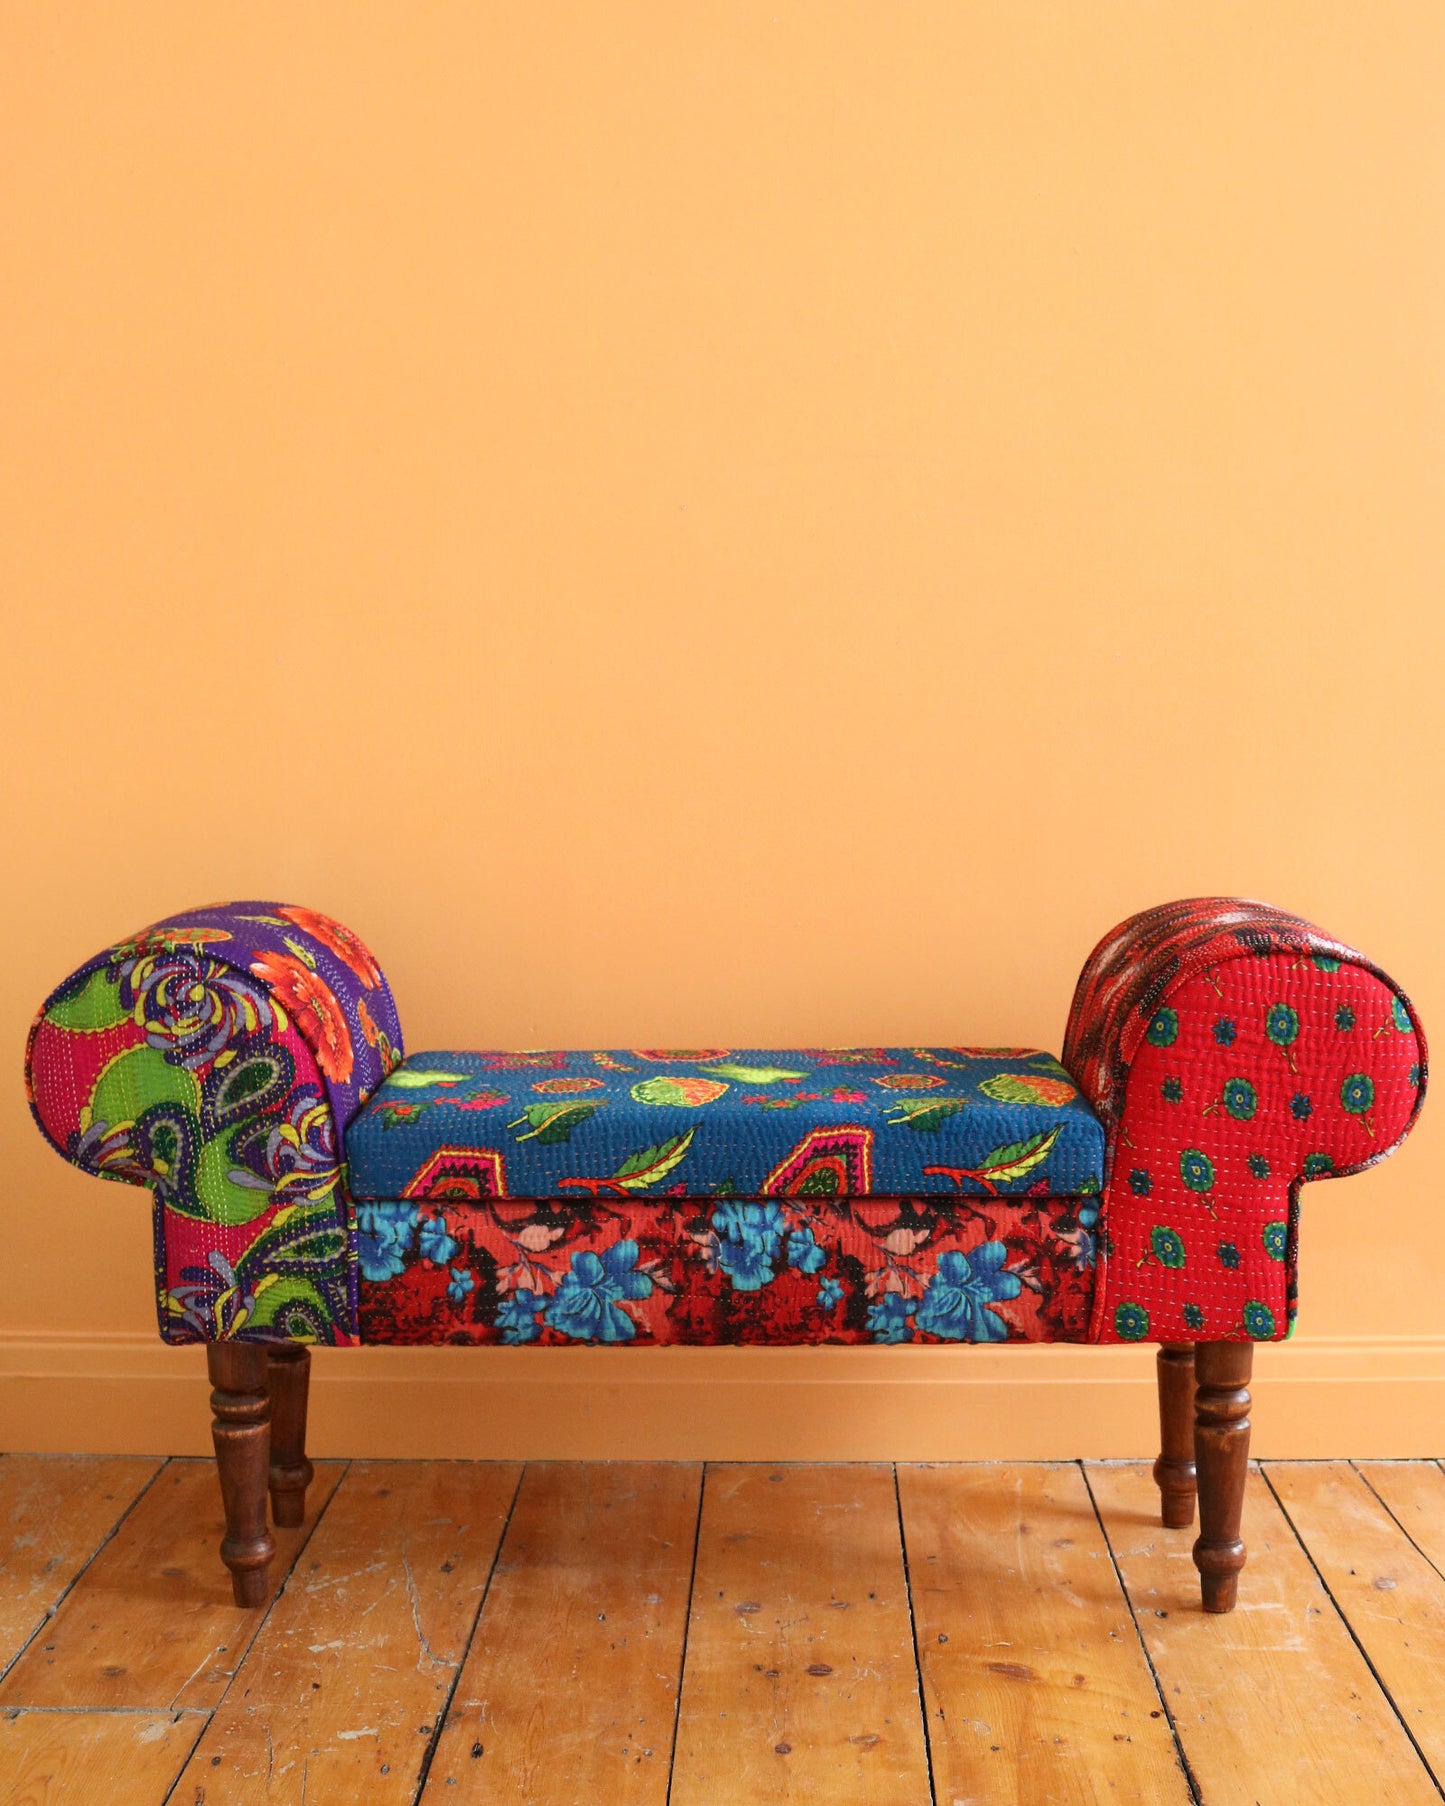 Hand-Stitched Vintage Scroll Bench with Storage, No. 19